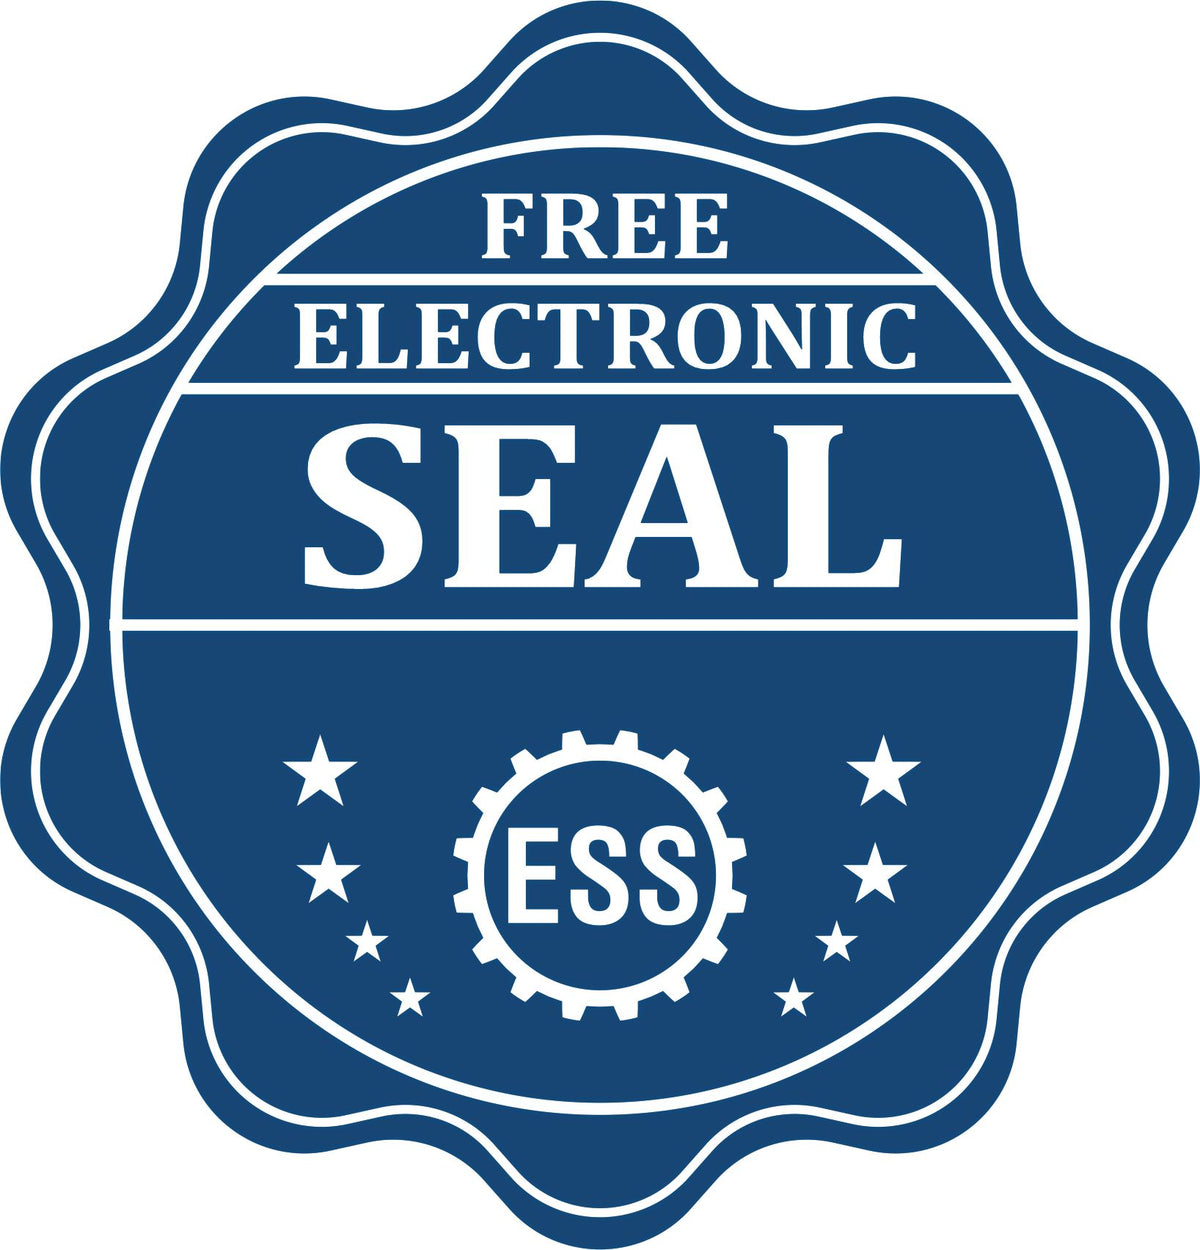 A badge showing a free electronic seal for the Heavy Duty Cast Iron Maine Engineer Seal Embosser with stars and the ESS gear on the emblem.